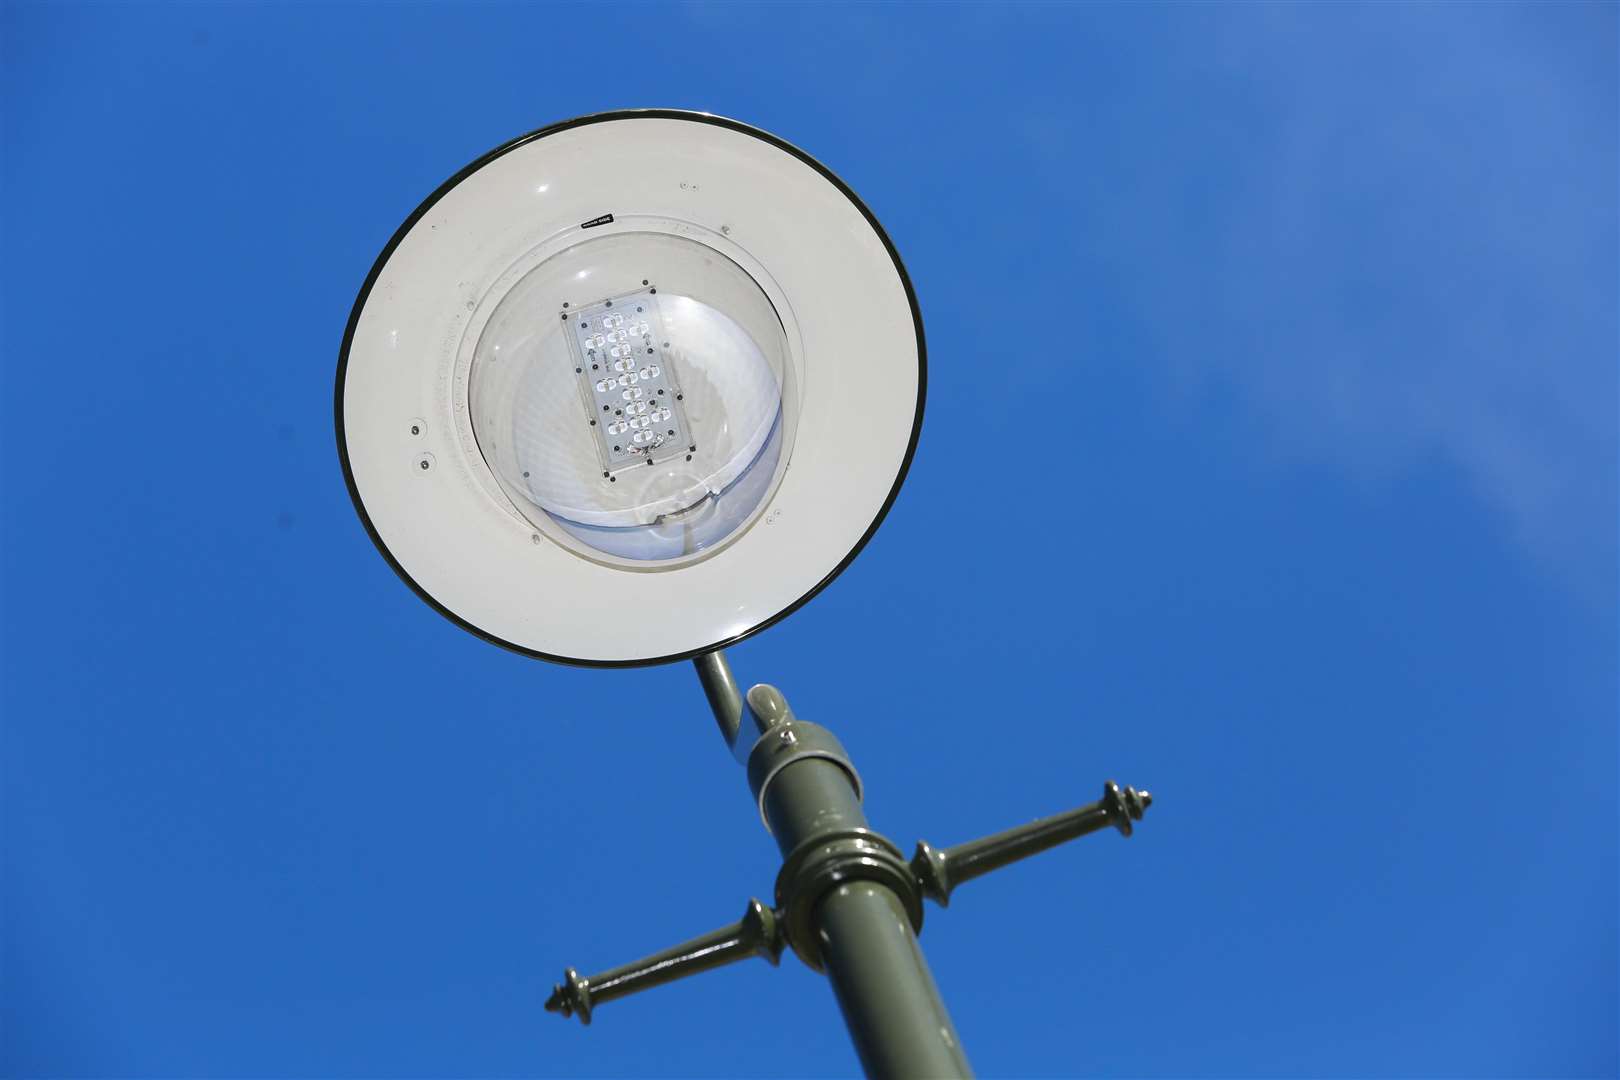 Research claimed certain street lighting could damage health